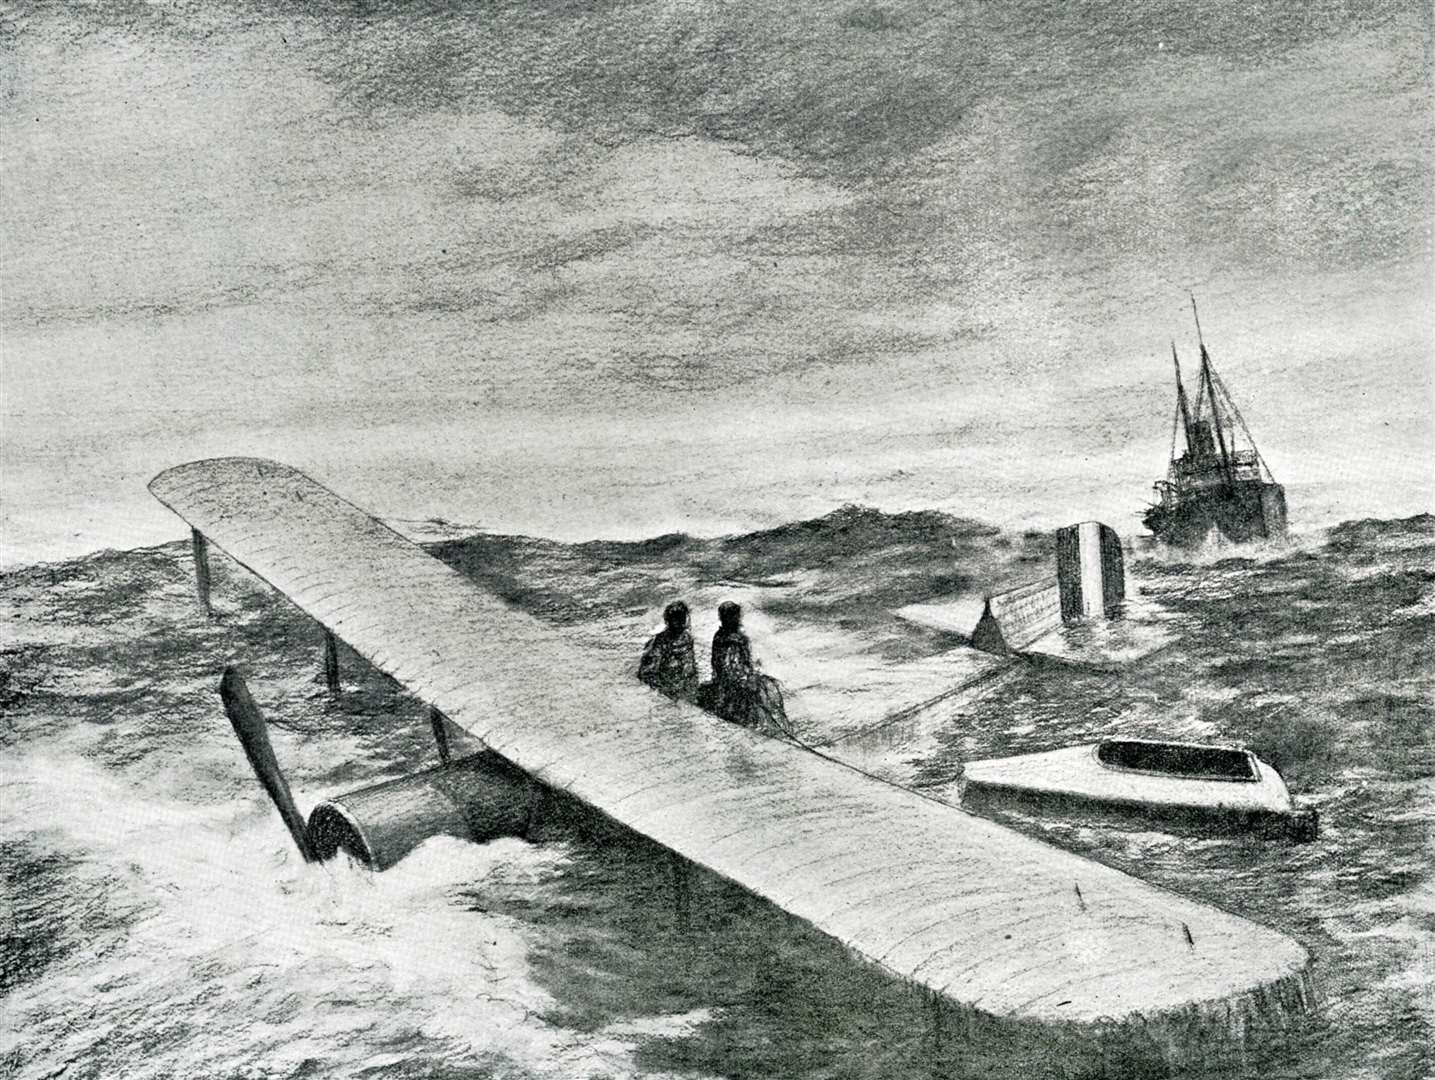 Artist's impression of the Danish steamer Mary coming to pick up the airmen.